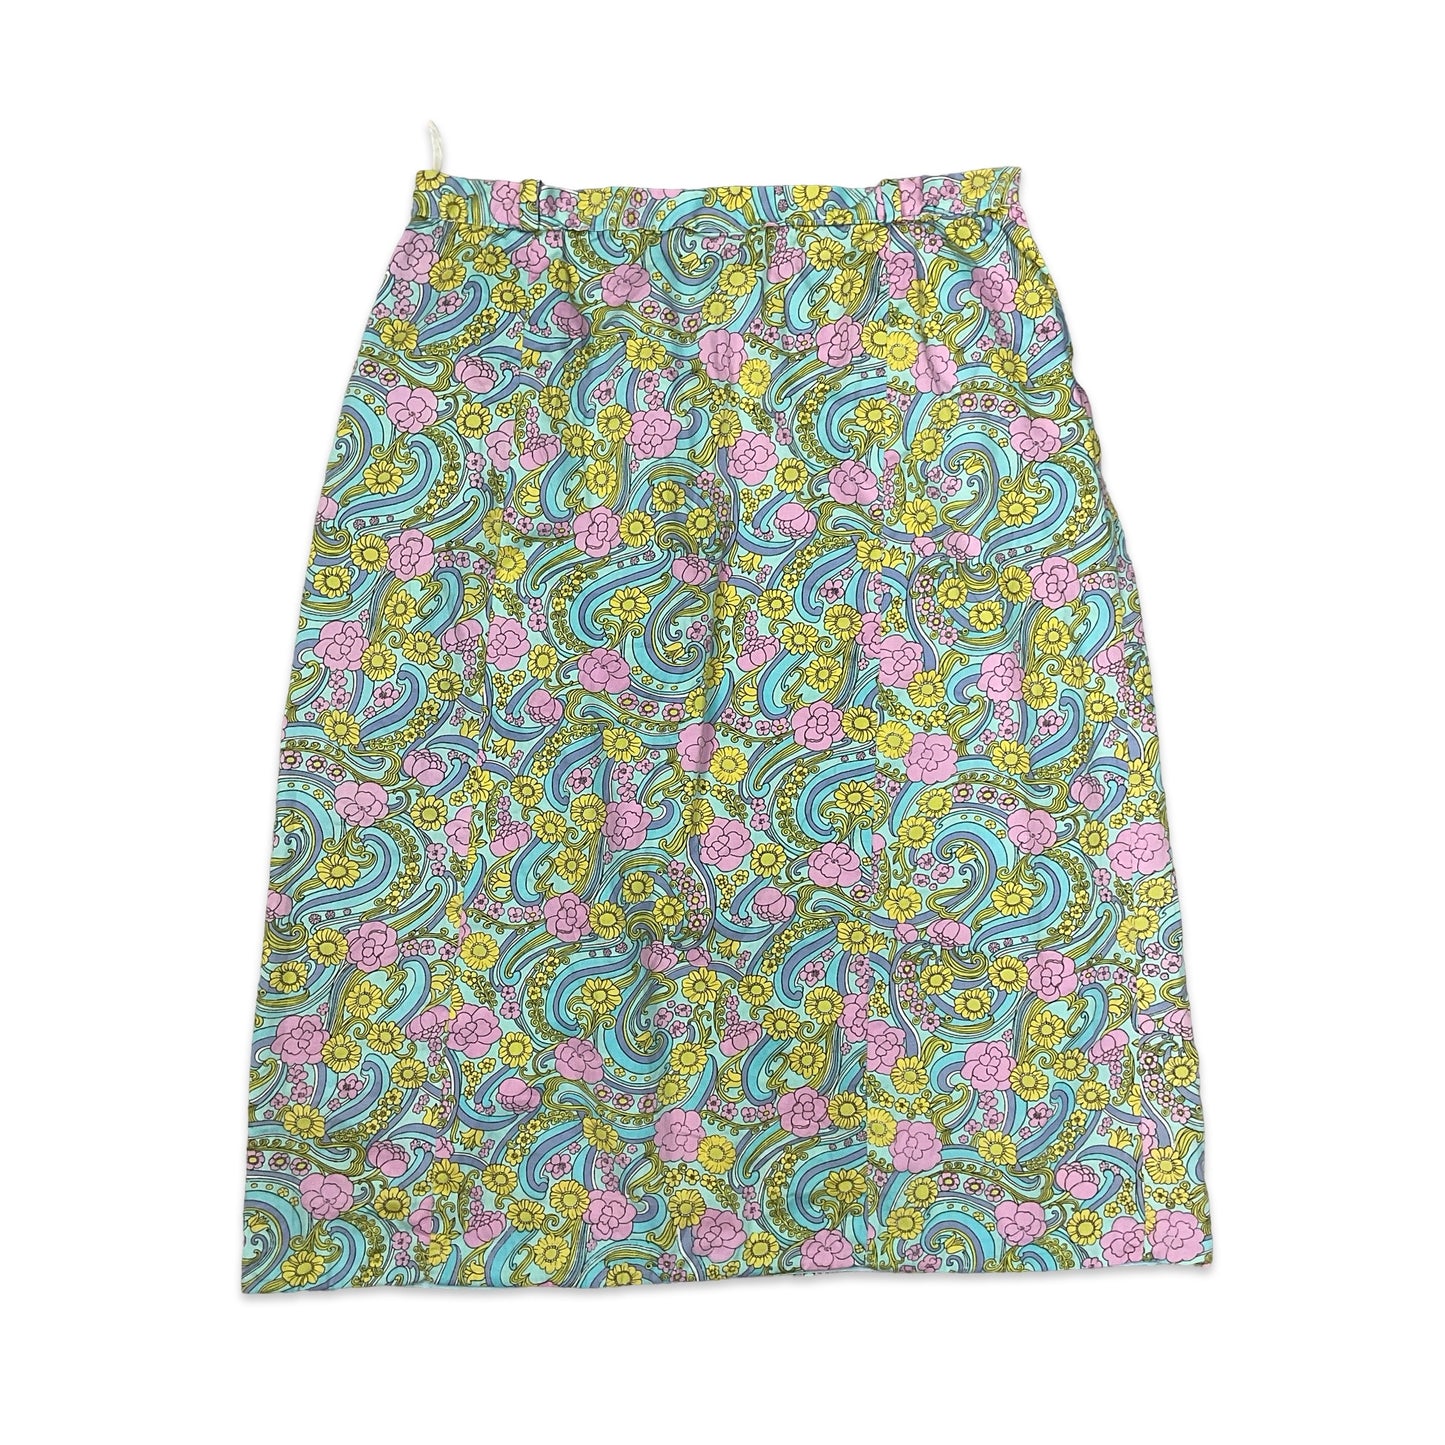 Vintage 70s Pink Yellow & Blue Psychedelic Floral Print A-line Midi Skirt 8